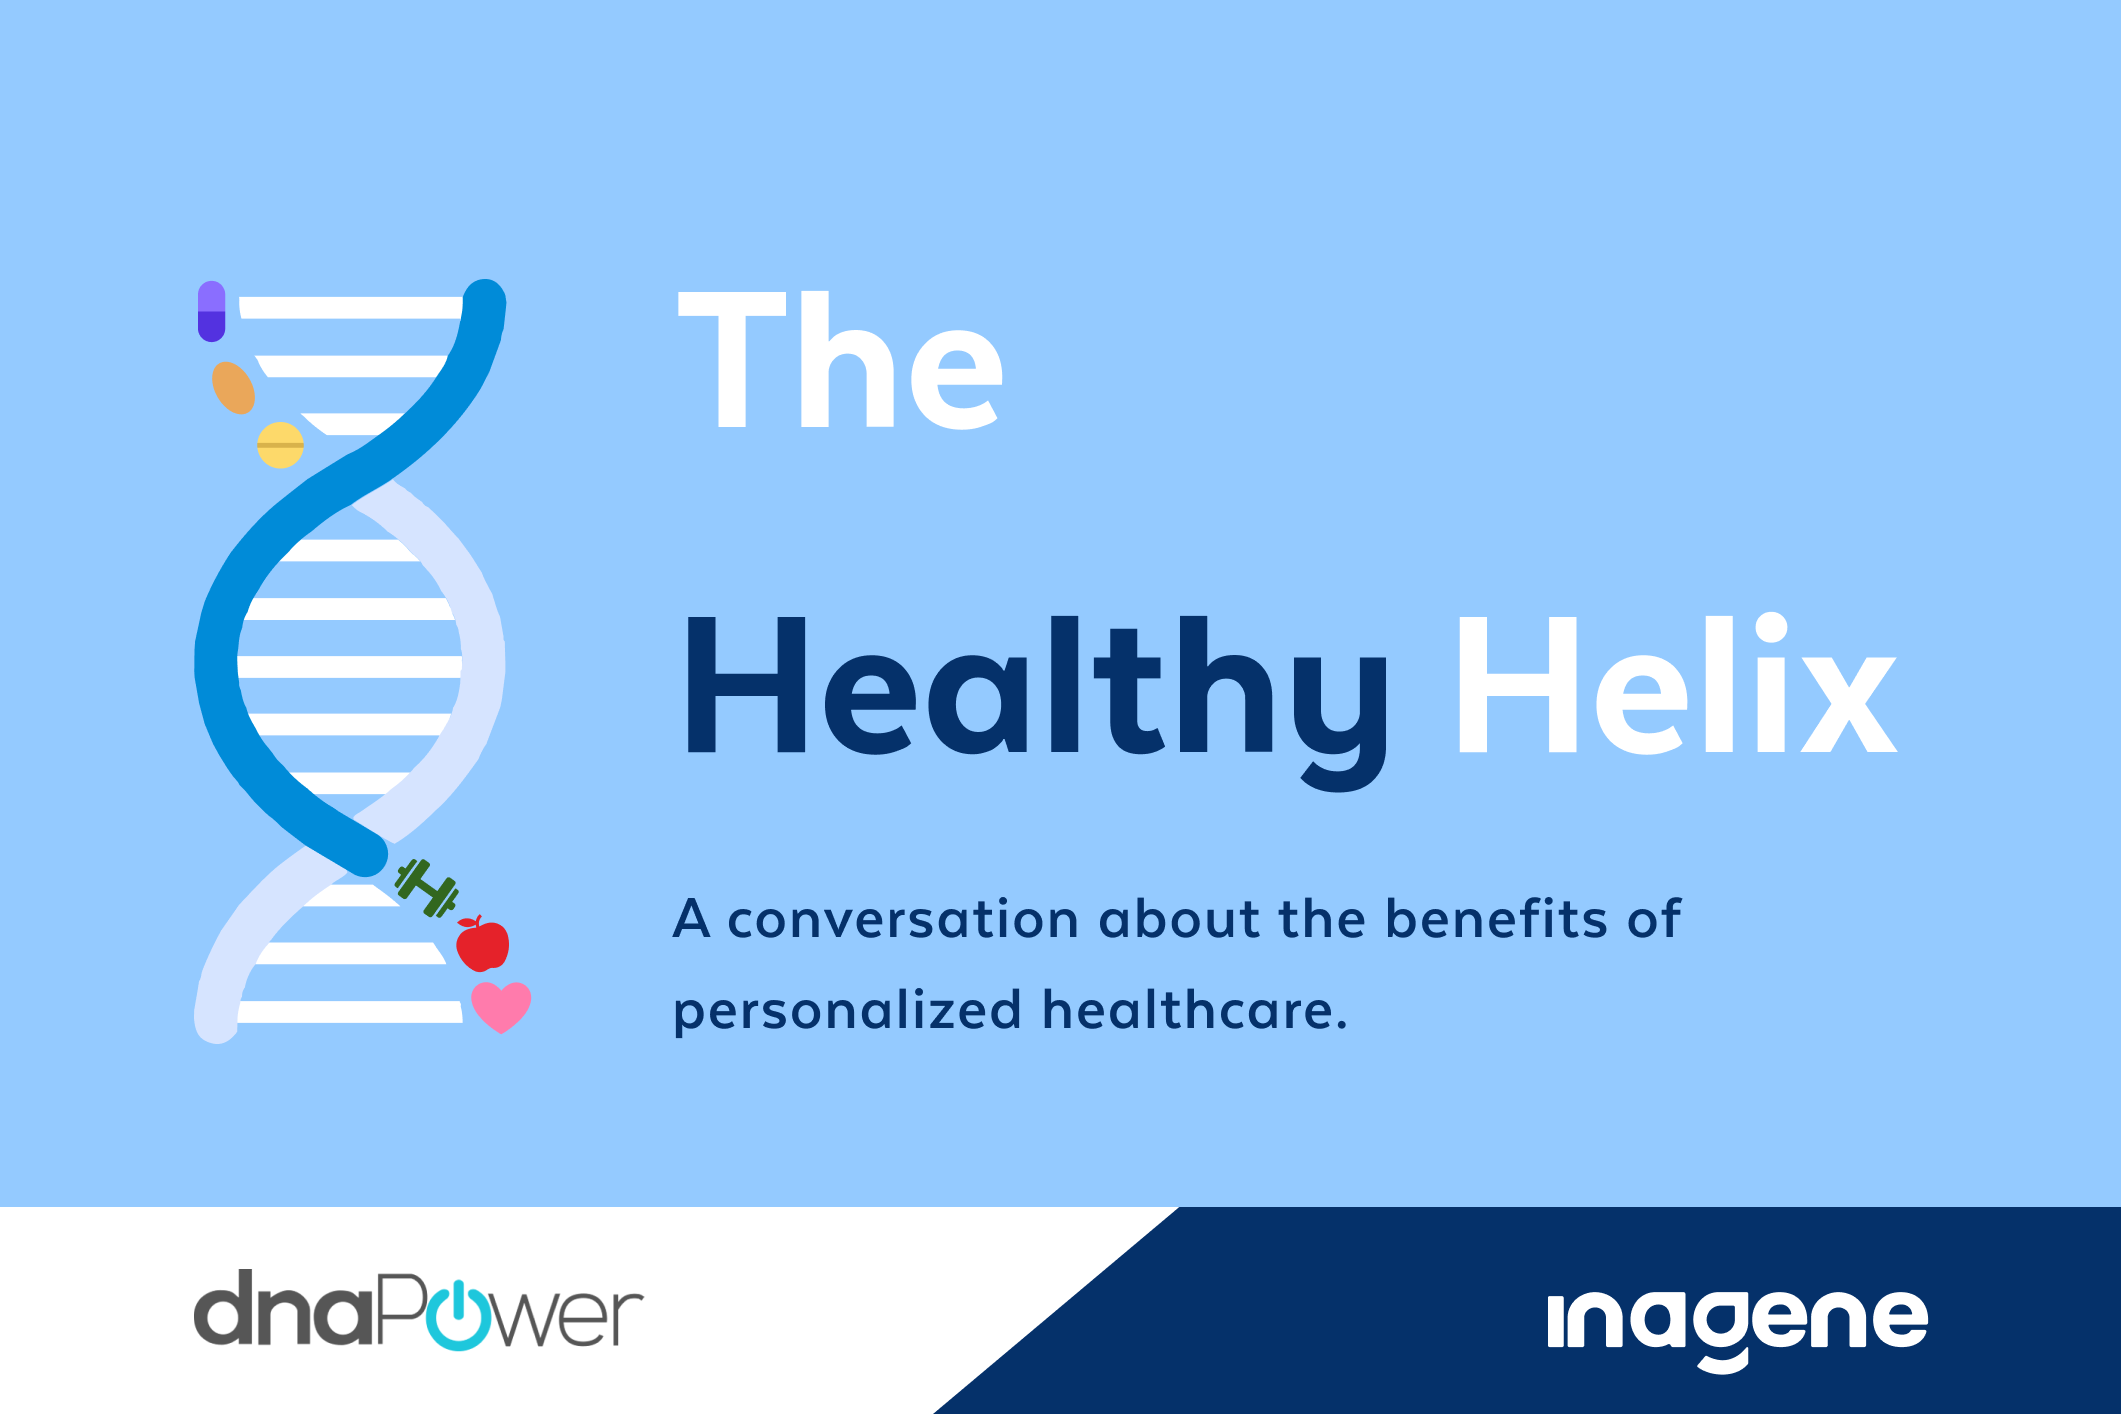 Inagene Diagnostics Launches the HealthyHelix: First Episode on Personalized Healthcare